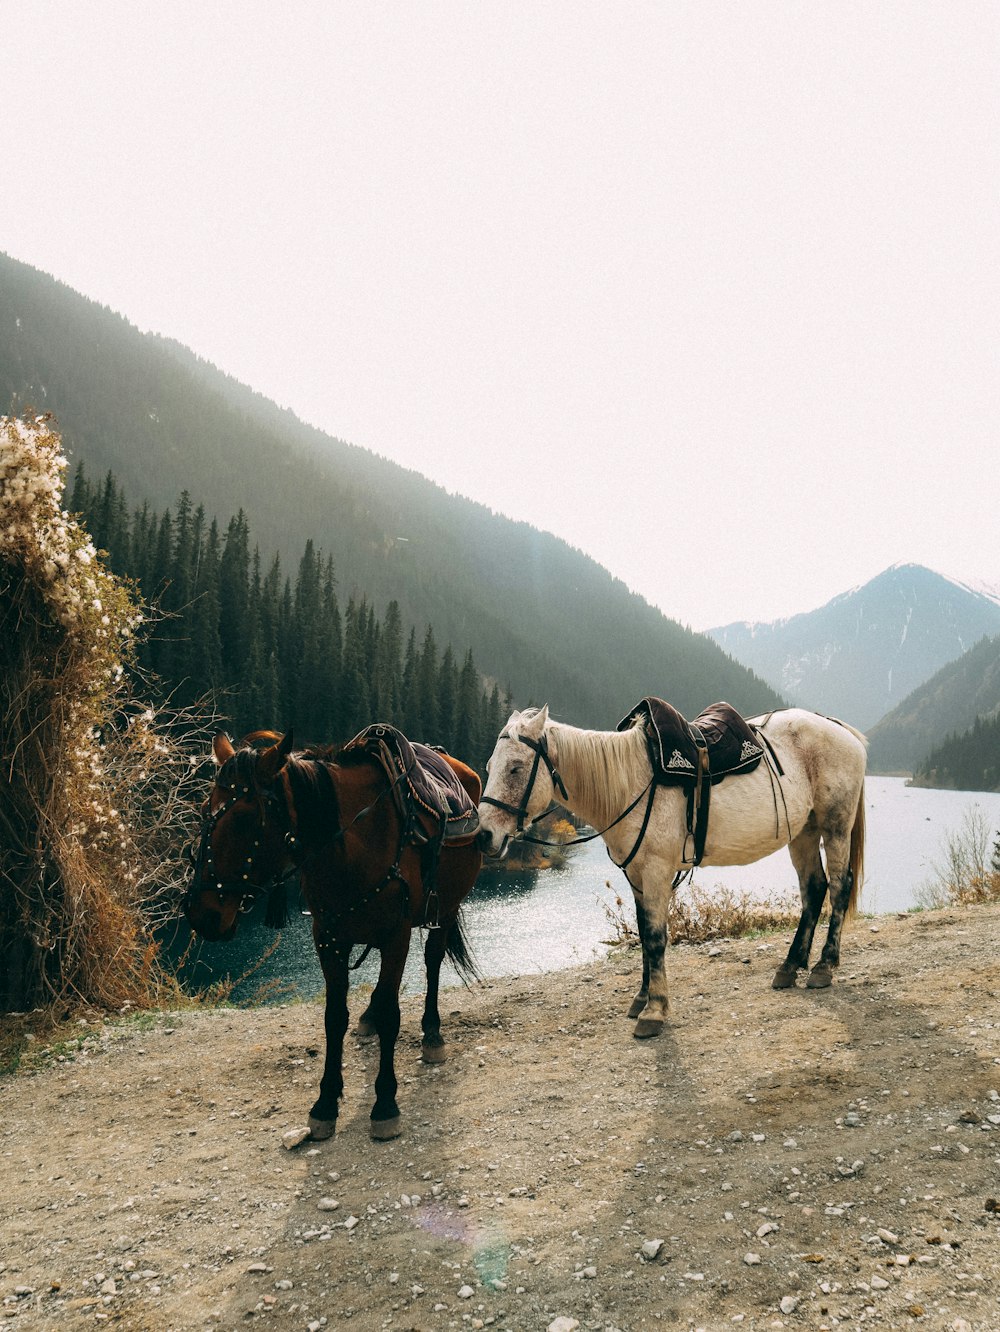 horses with saddles on a dirt road